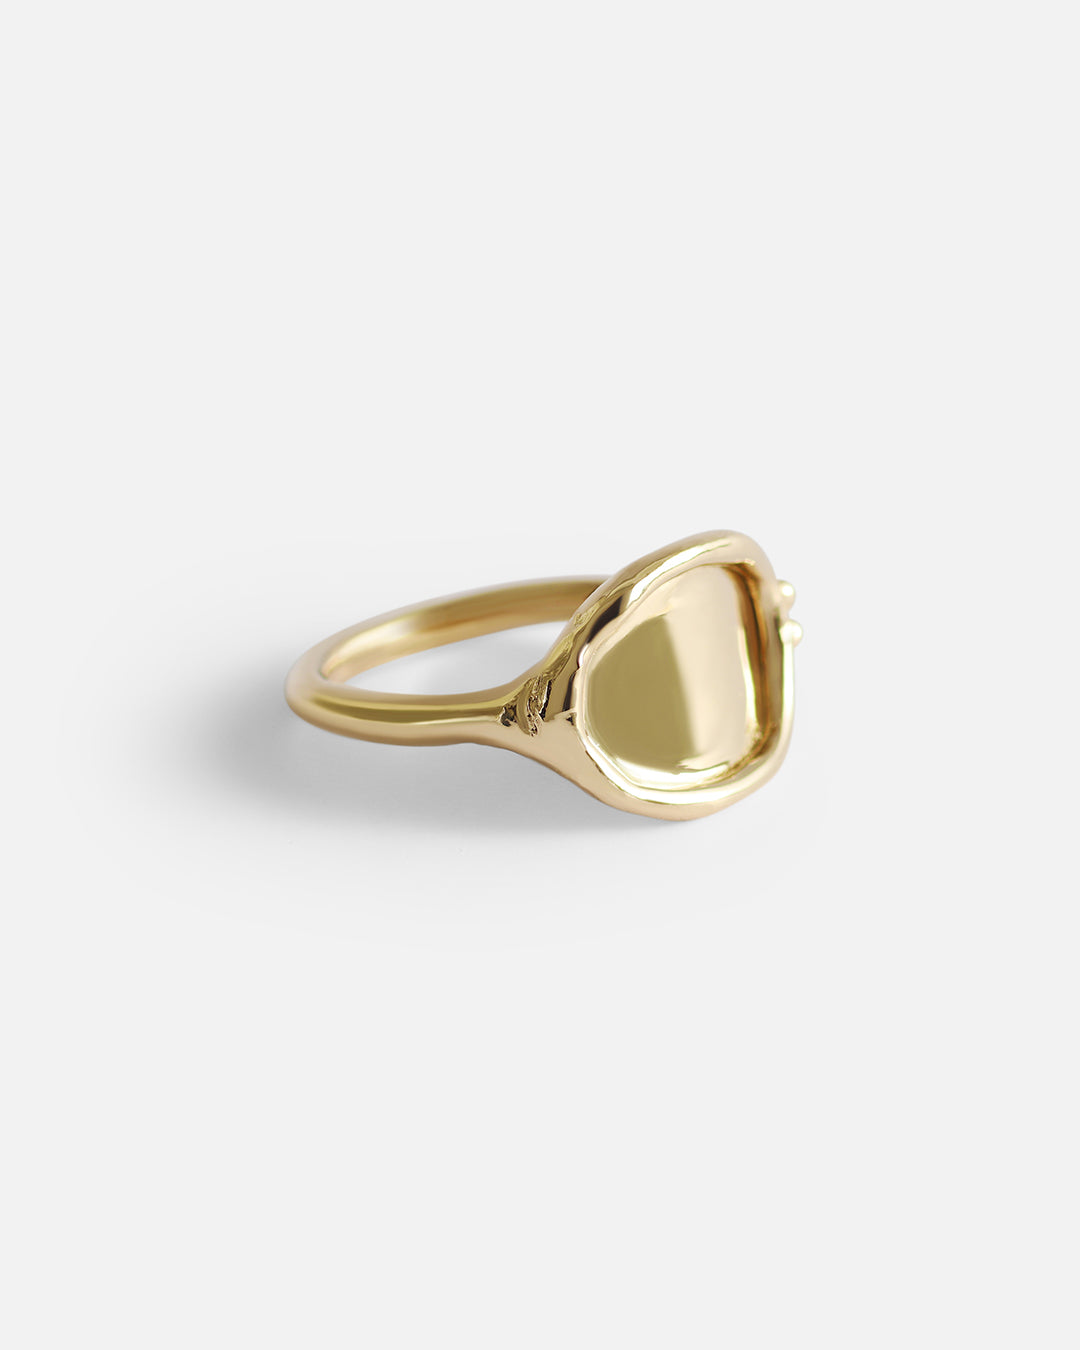 Reflection / II Ring By Alfonzo